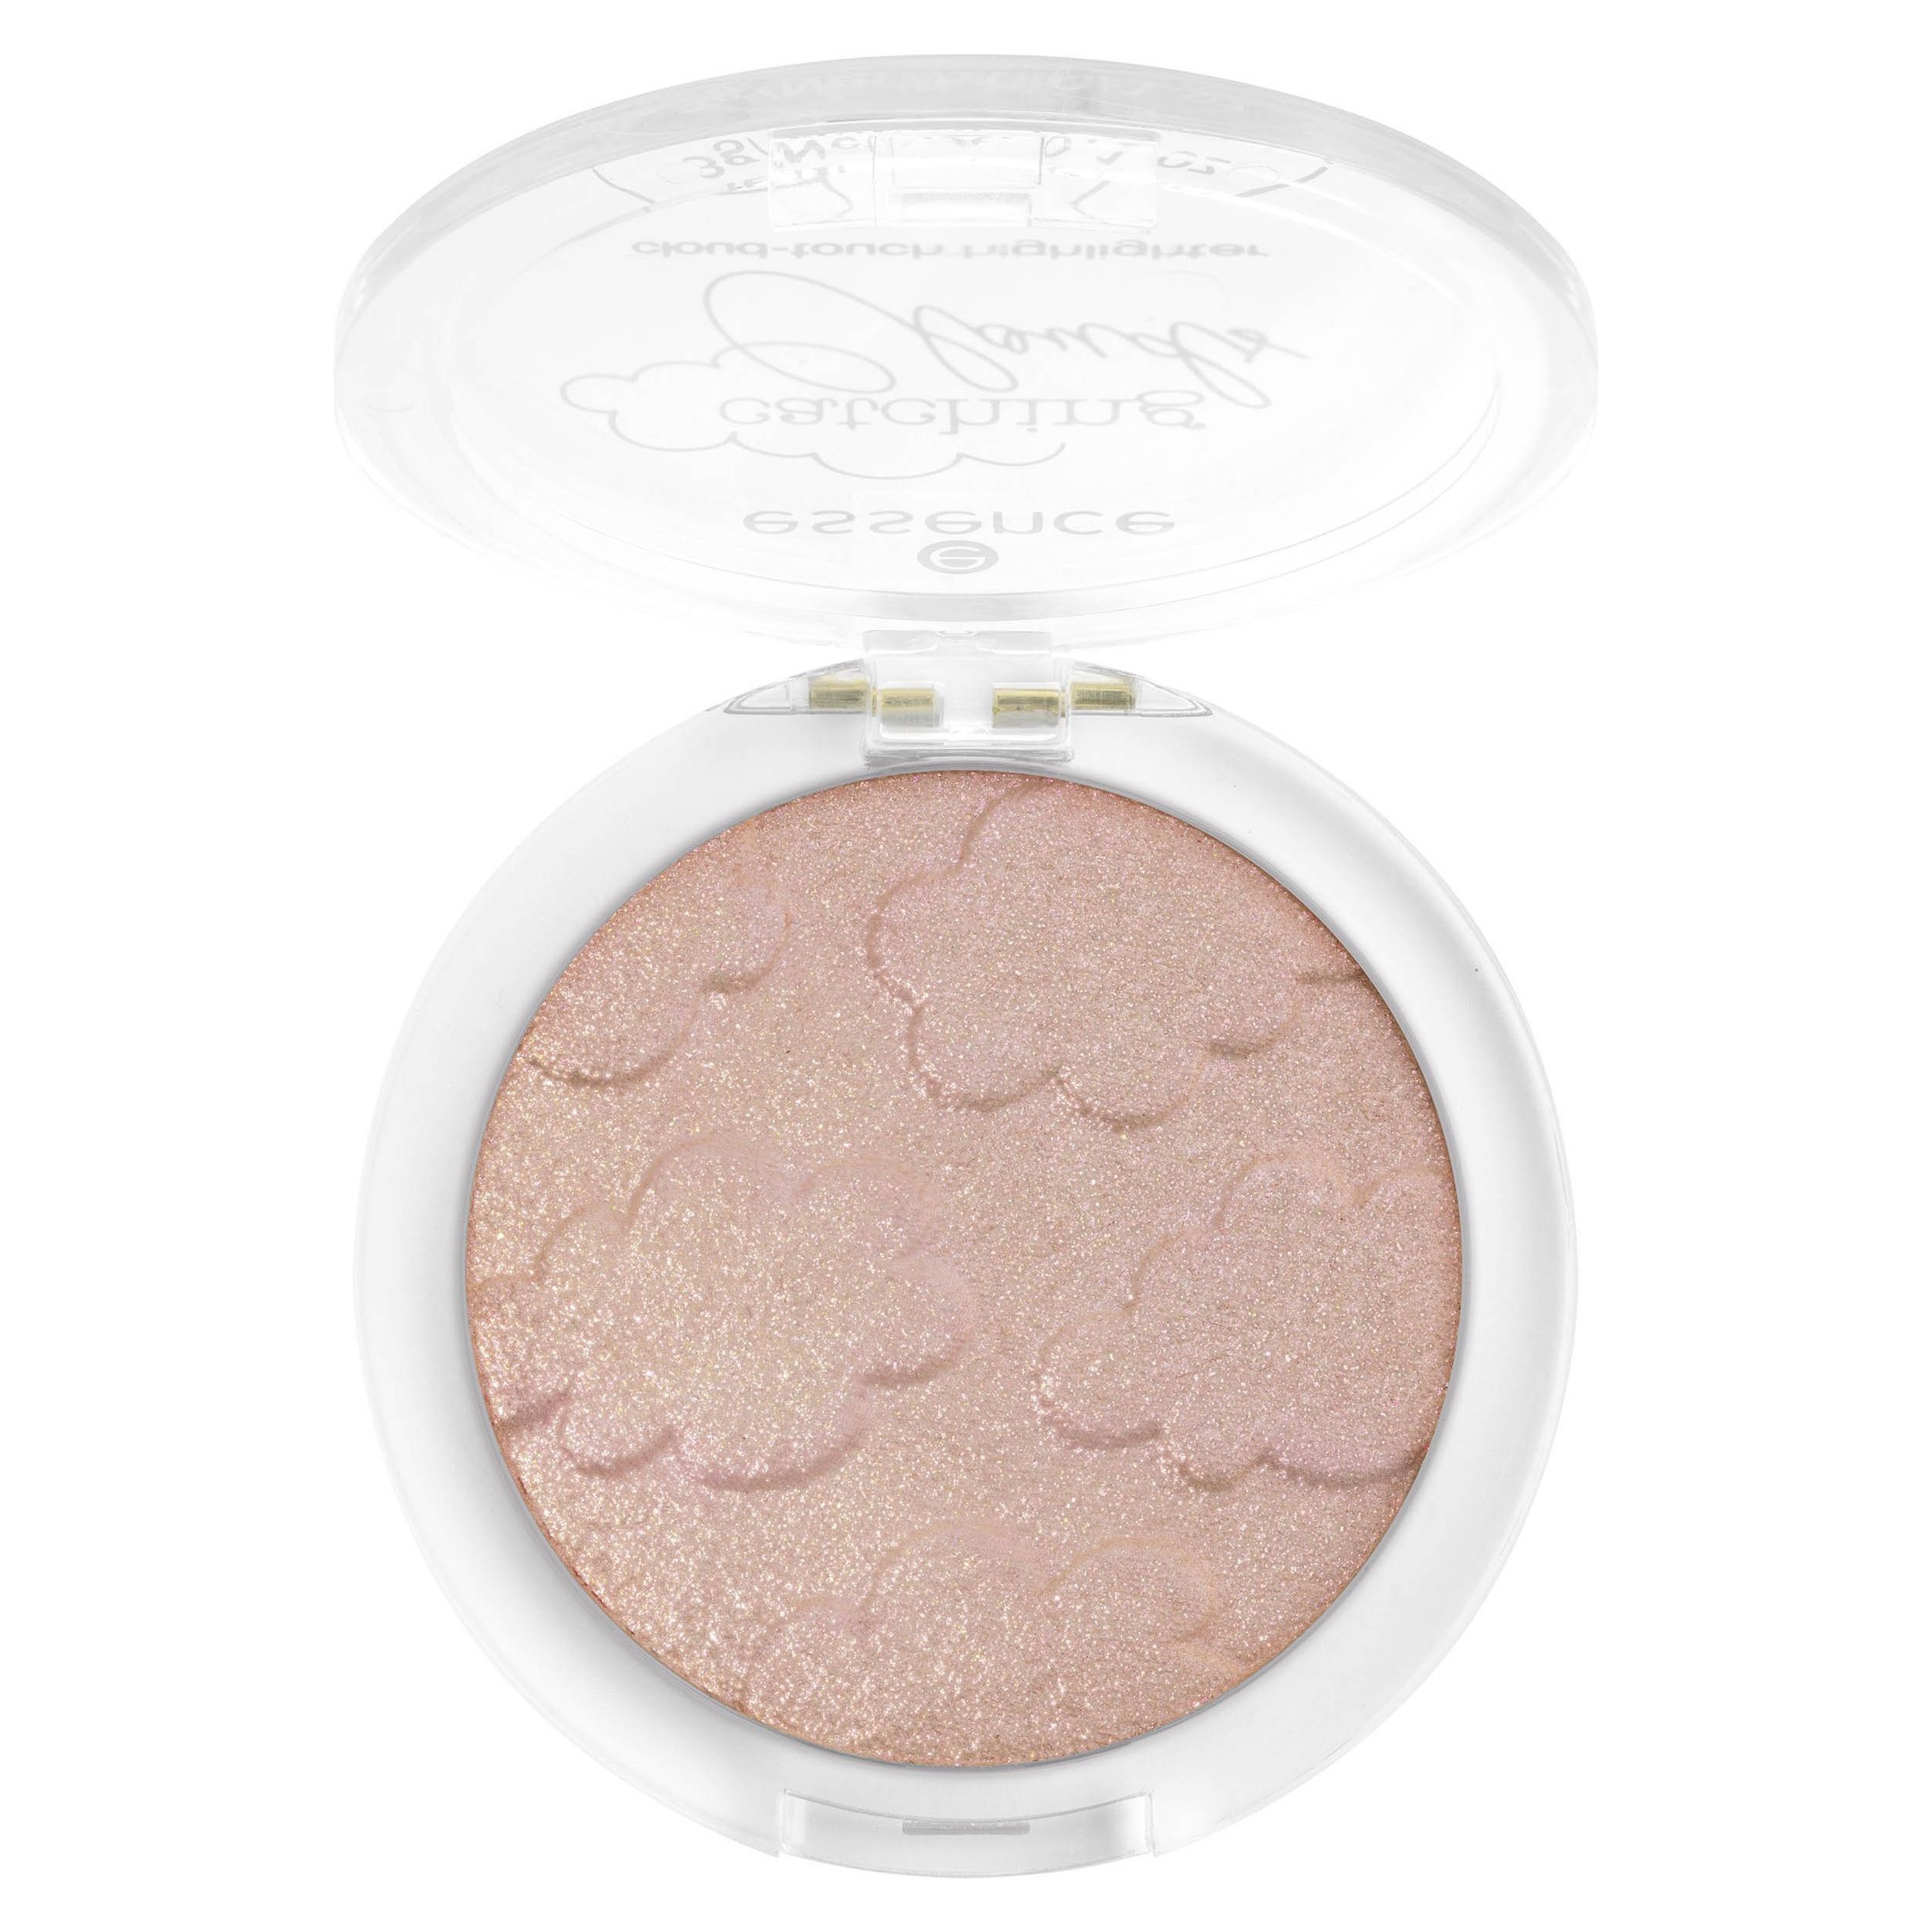 Catching Clouds - Cloud-Touch Highlighter